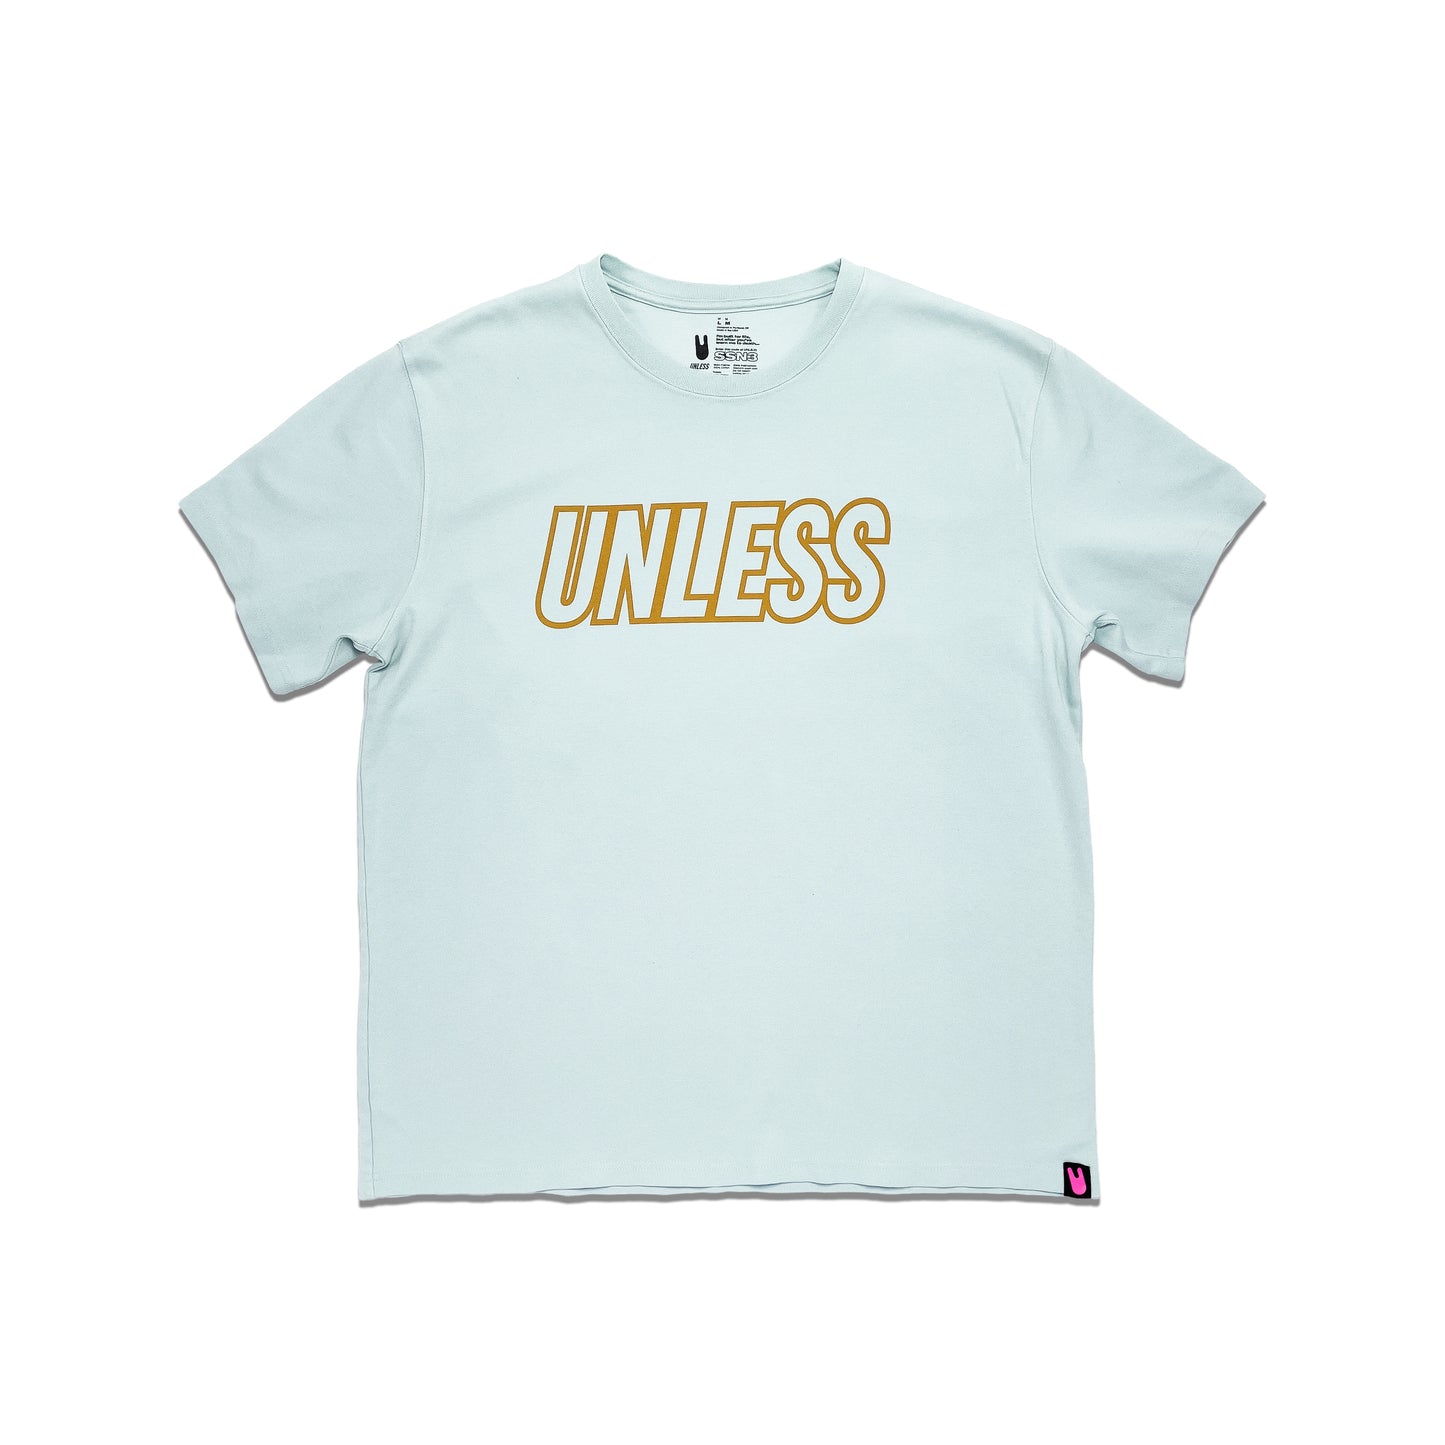 The UNLESS Biodegradable Tee